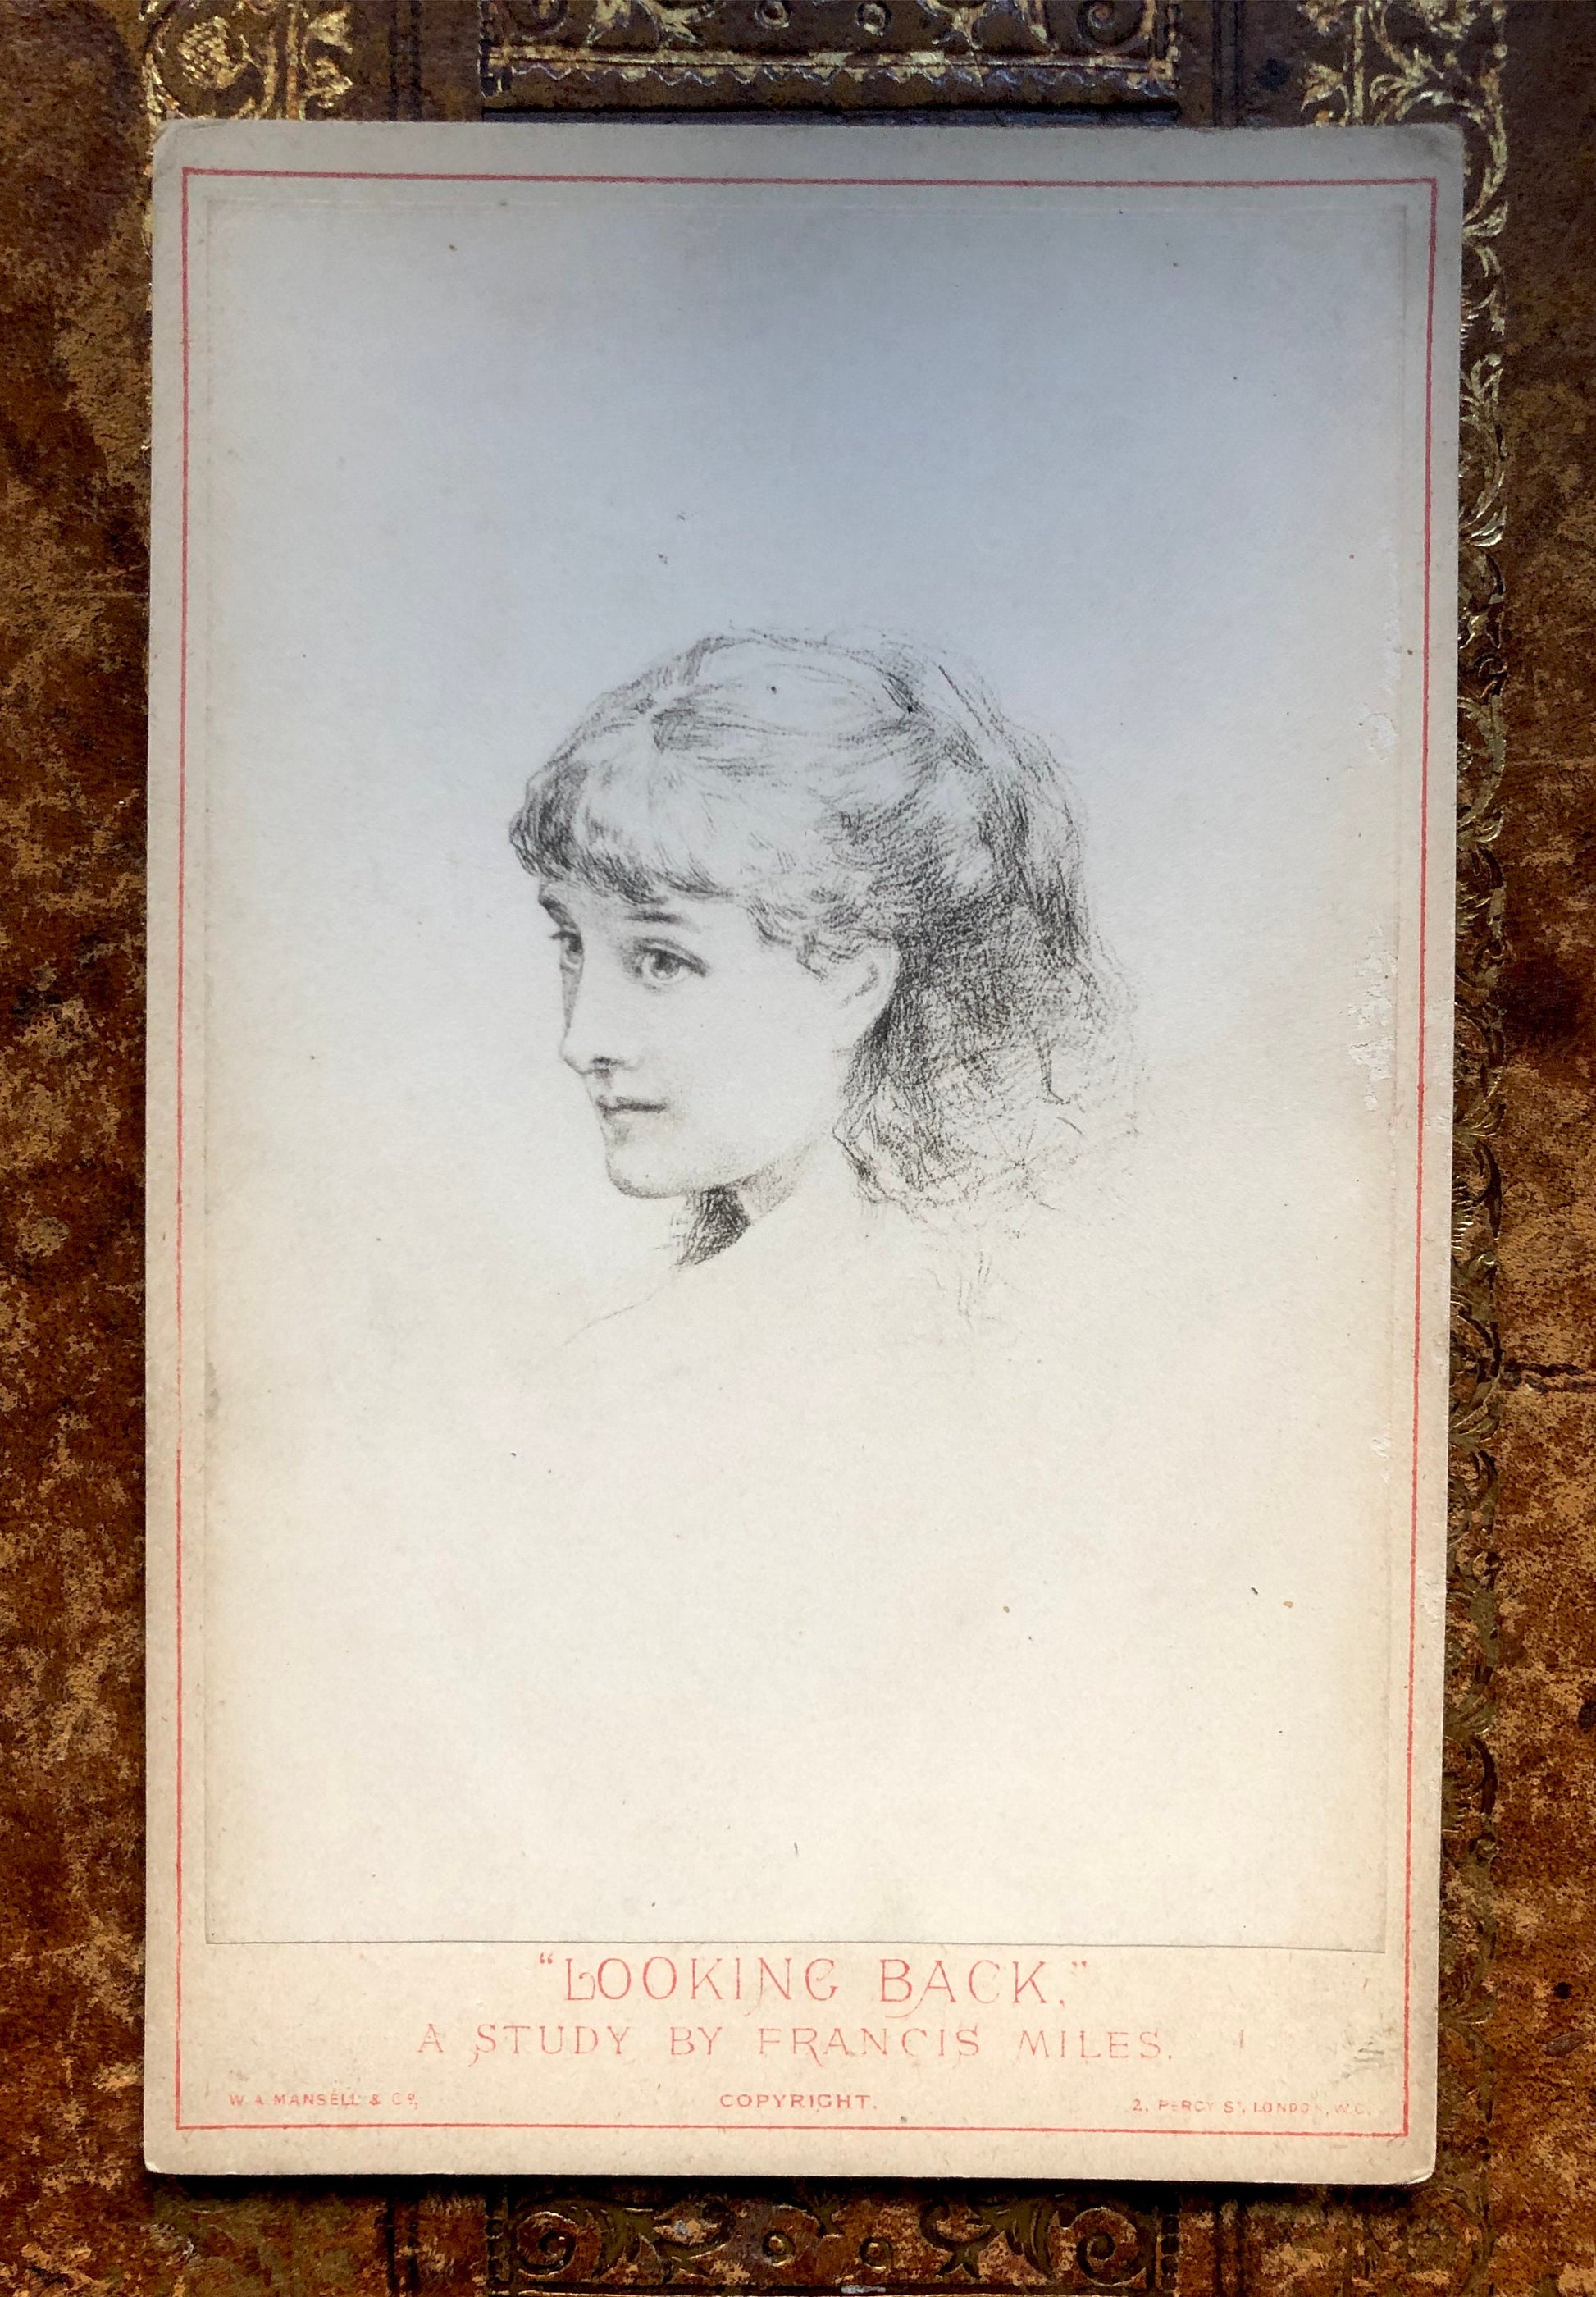 5 Cabinet Cards. Copies of Pencil Drawings of Women by Francis Miles. In Red Cloth Portfolio. Dated 1872. Size: 16.5 x 10.5 cms.